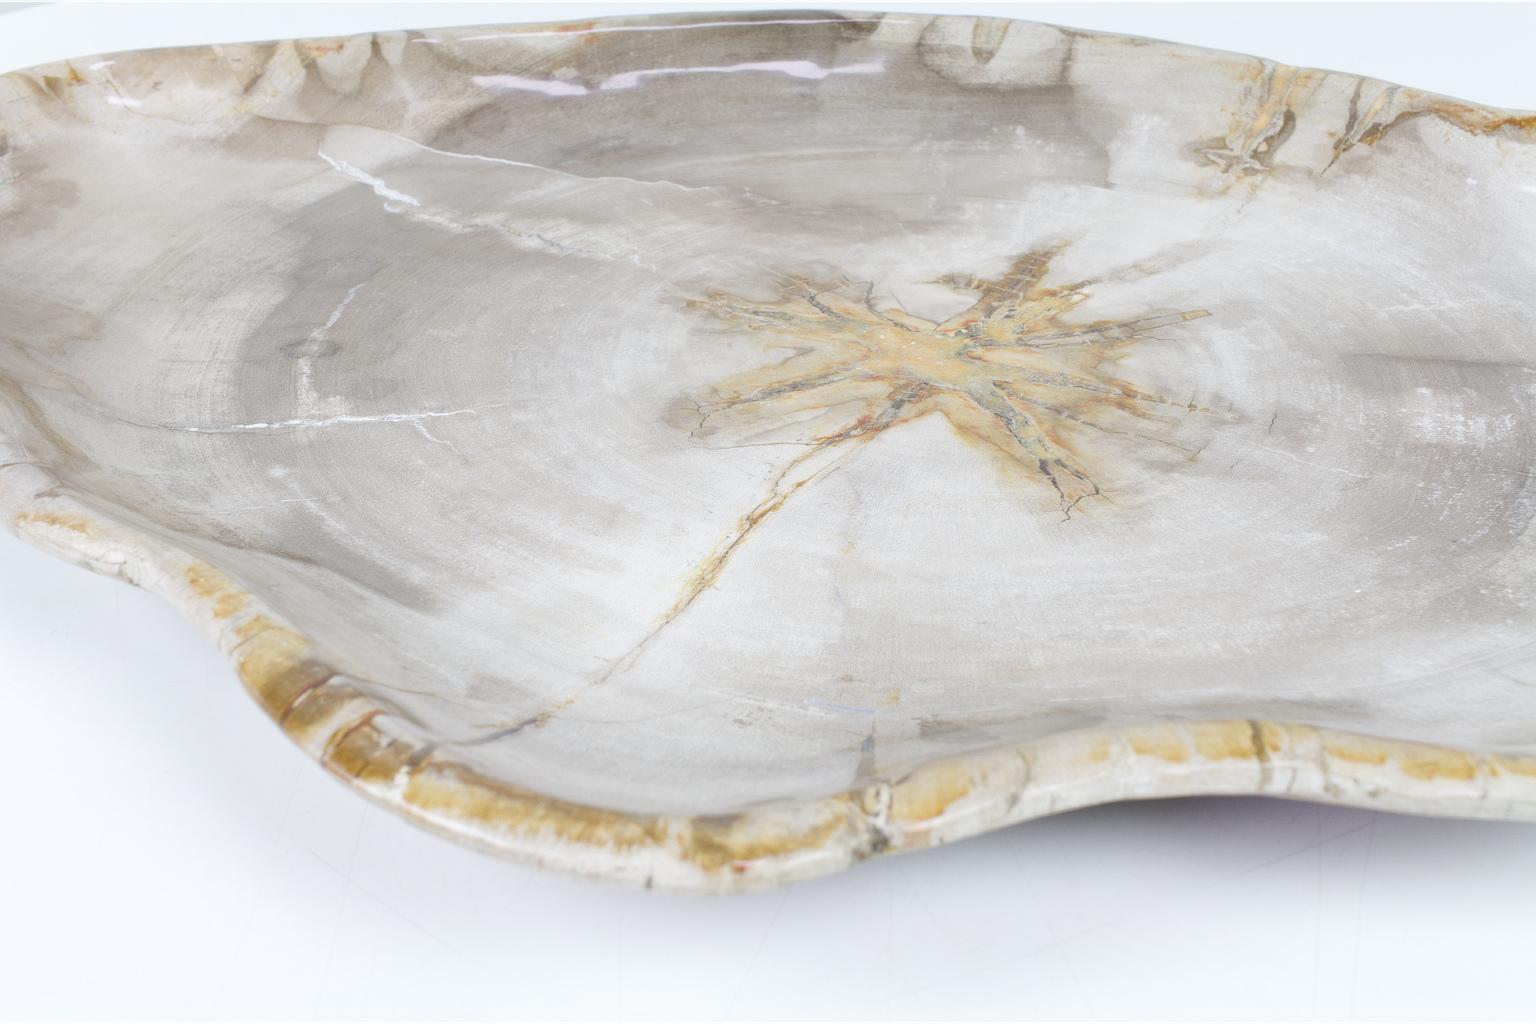 18th Century and Earlier Large Petrified Wooden Plate in Beige Tones, Object Organic Origin